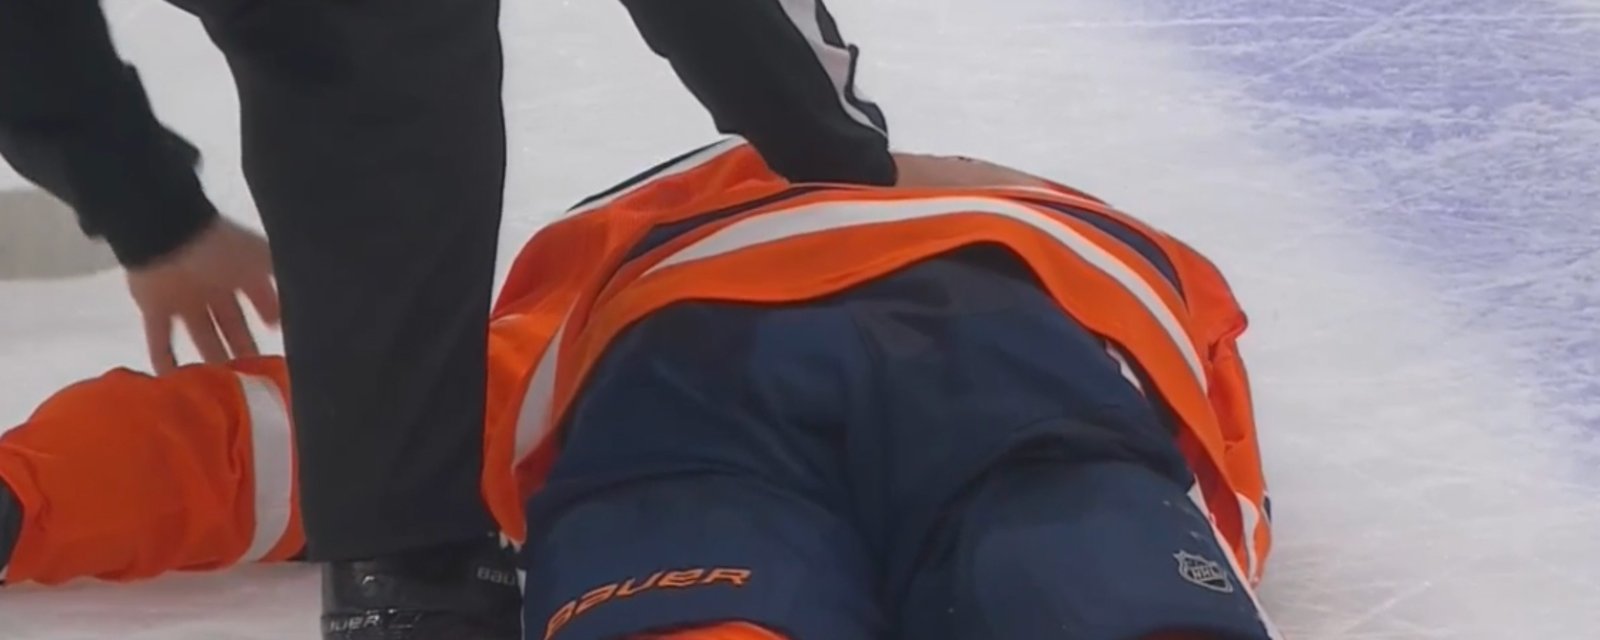 Zack Kassian smashes his head on the ice during fight